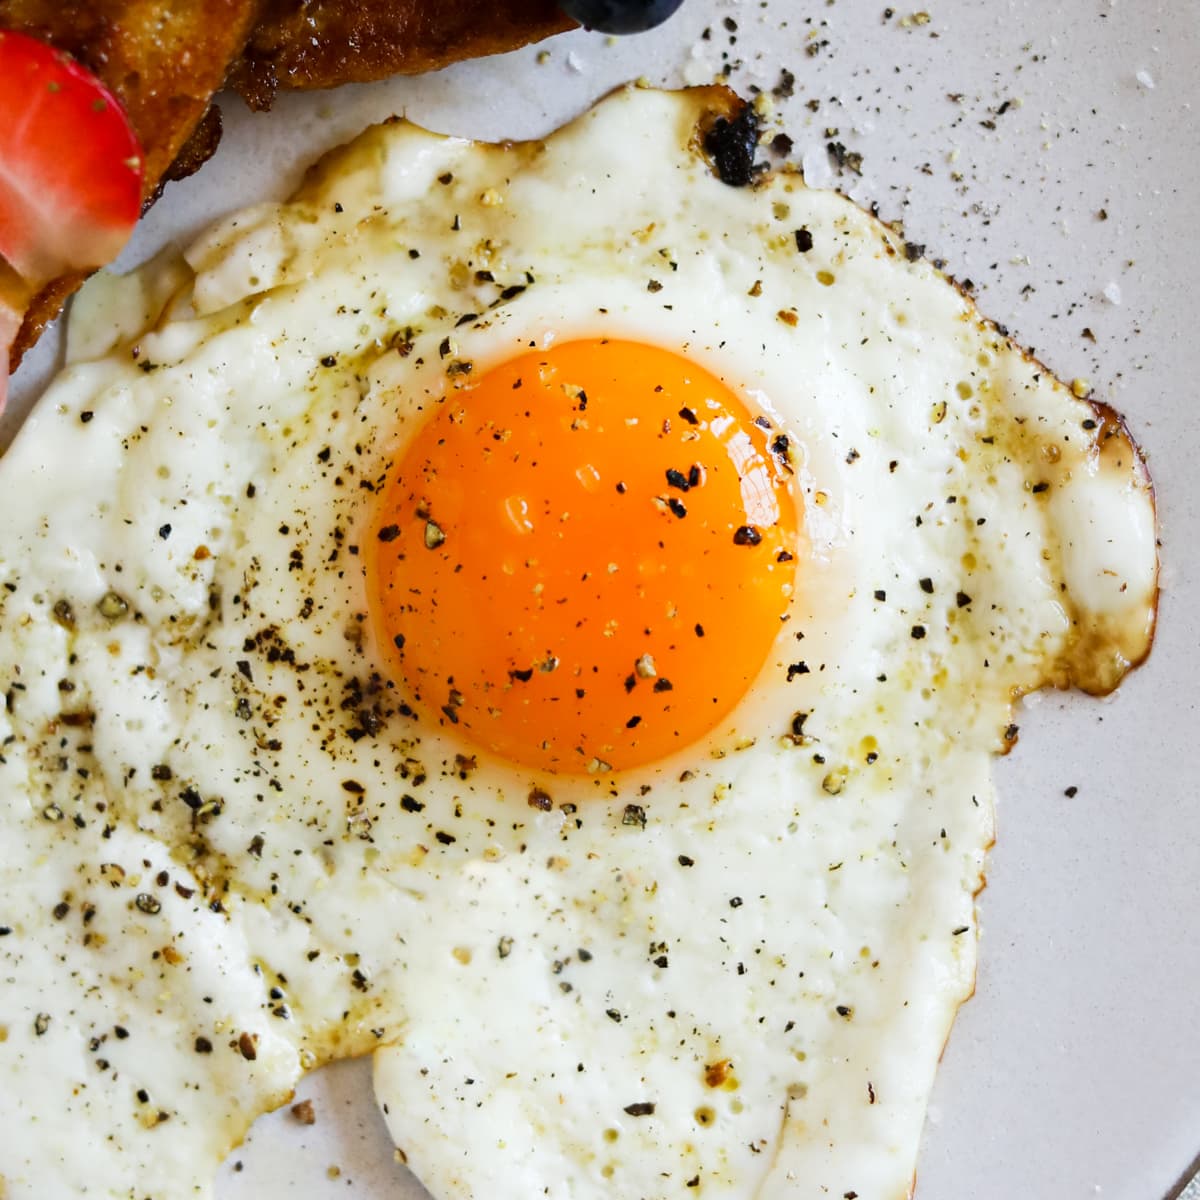 https://theheirloompantry.co/wp-content/uploads/2022/05/how-to-cook-sunny-side-up-eggs-the-heirloom-pantry-1.jpg